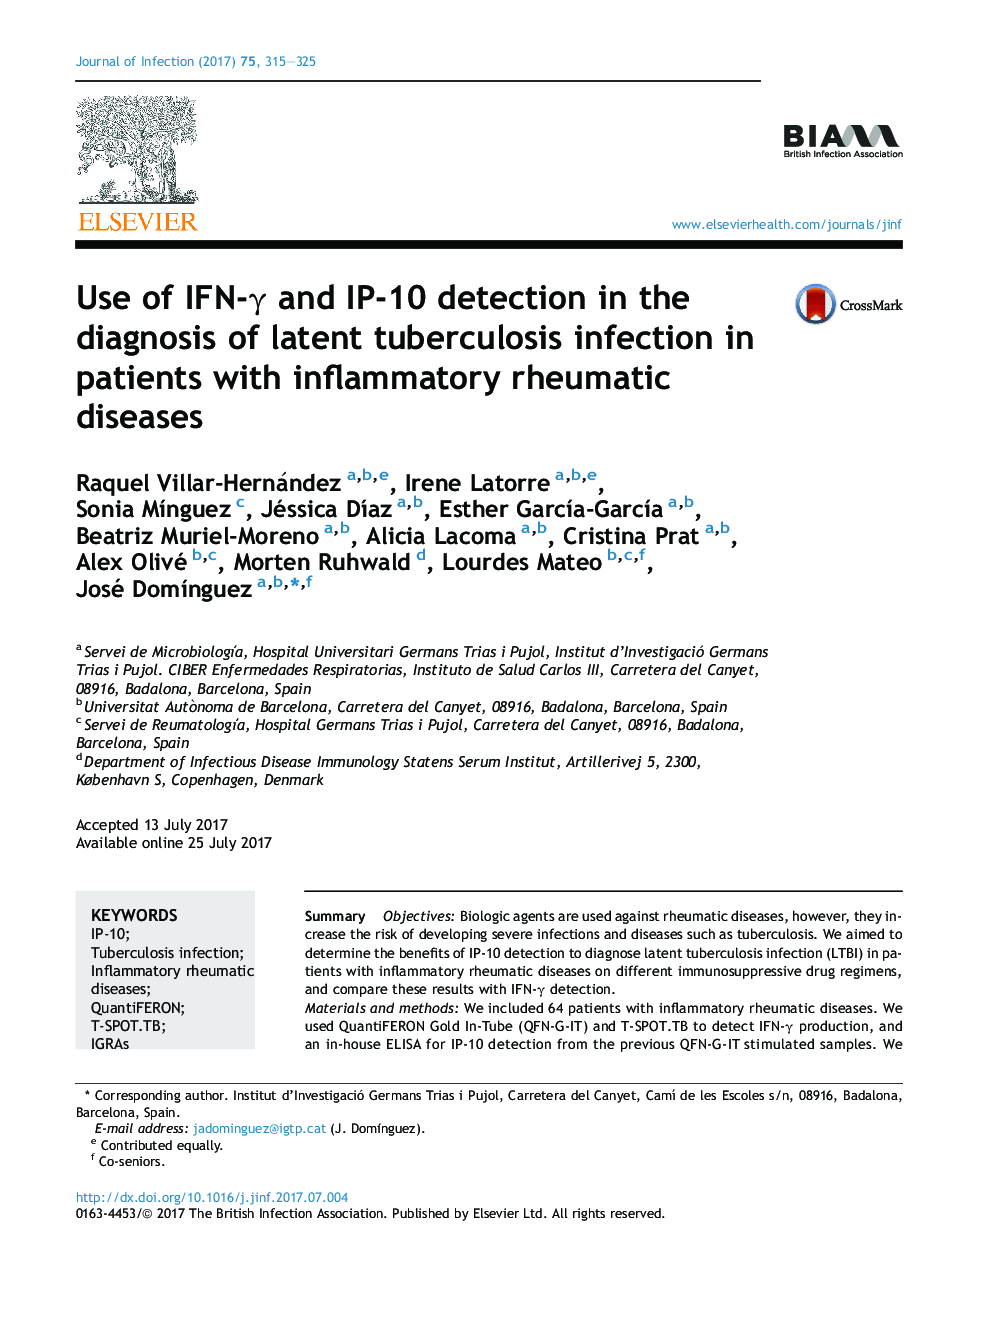 Use of IFN-Î³ and IP-10 detection in the diagnosis of latent tuberculosis infection in patients with inflammatory rheumatic diseases